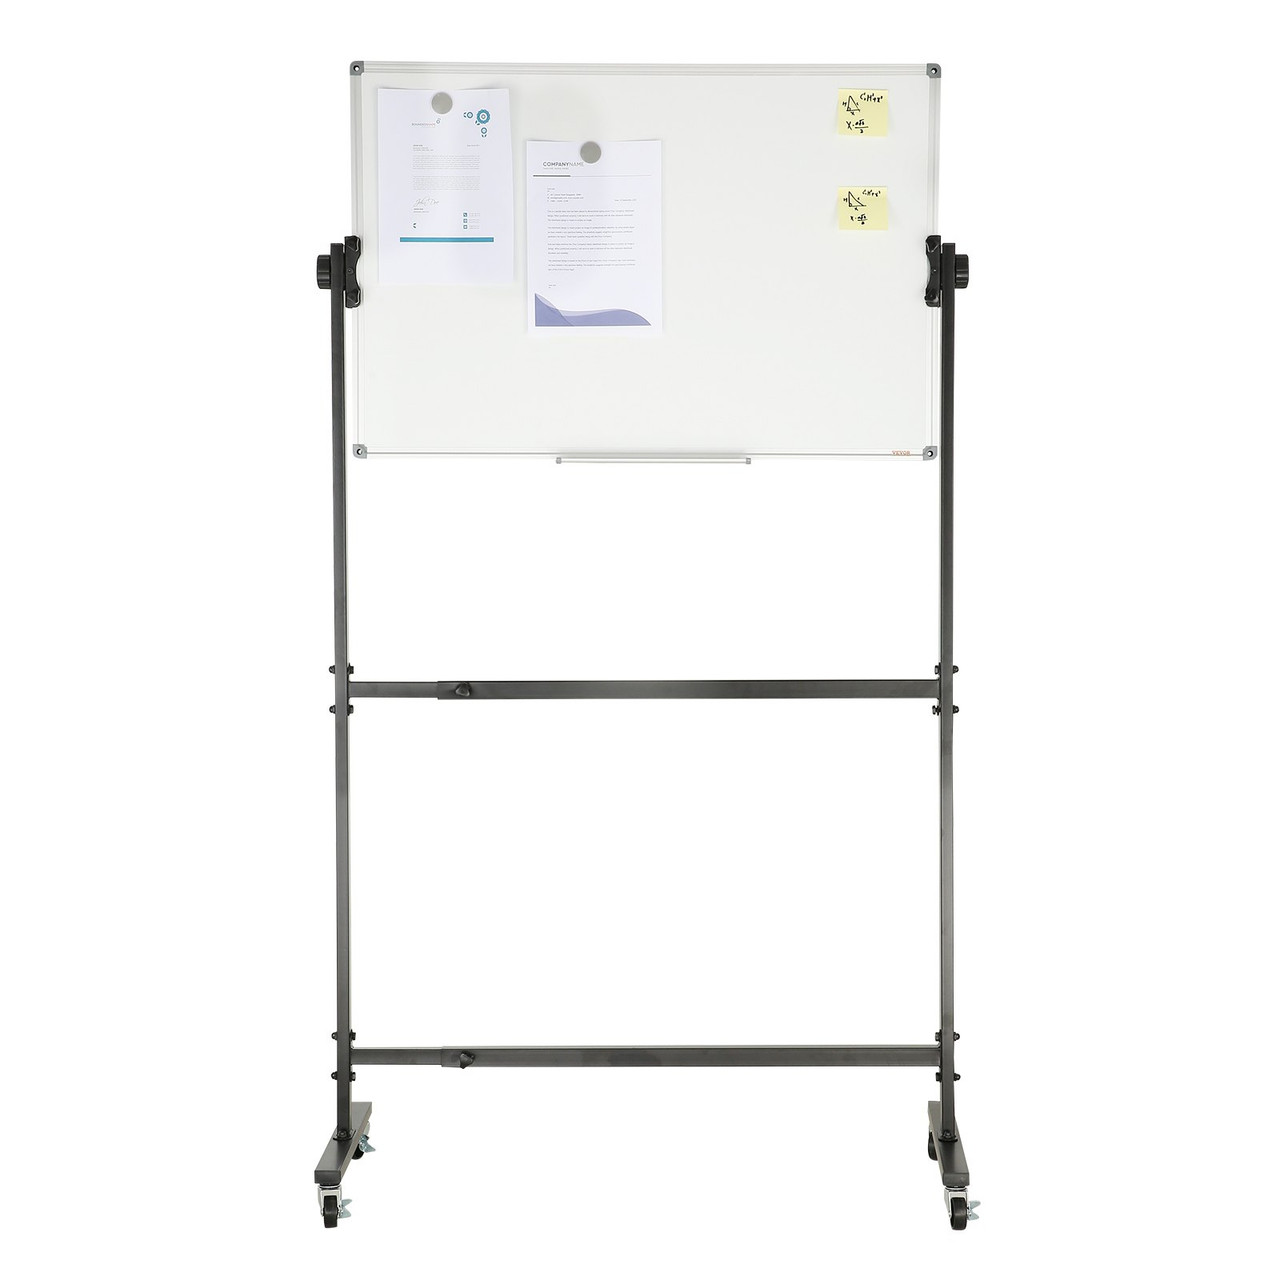 VEVOR Rolling Magnetic Whiteboard, Double-sided Mobile Whiteboard 36x24 Inches, Adjustable Height Dry Erase Board with Wheels, 1 Magnetic Erase & 3 Dry Erase Markers & Movable Tray Office, School